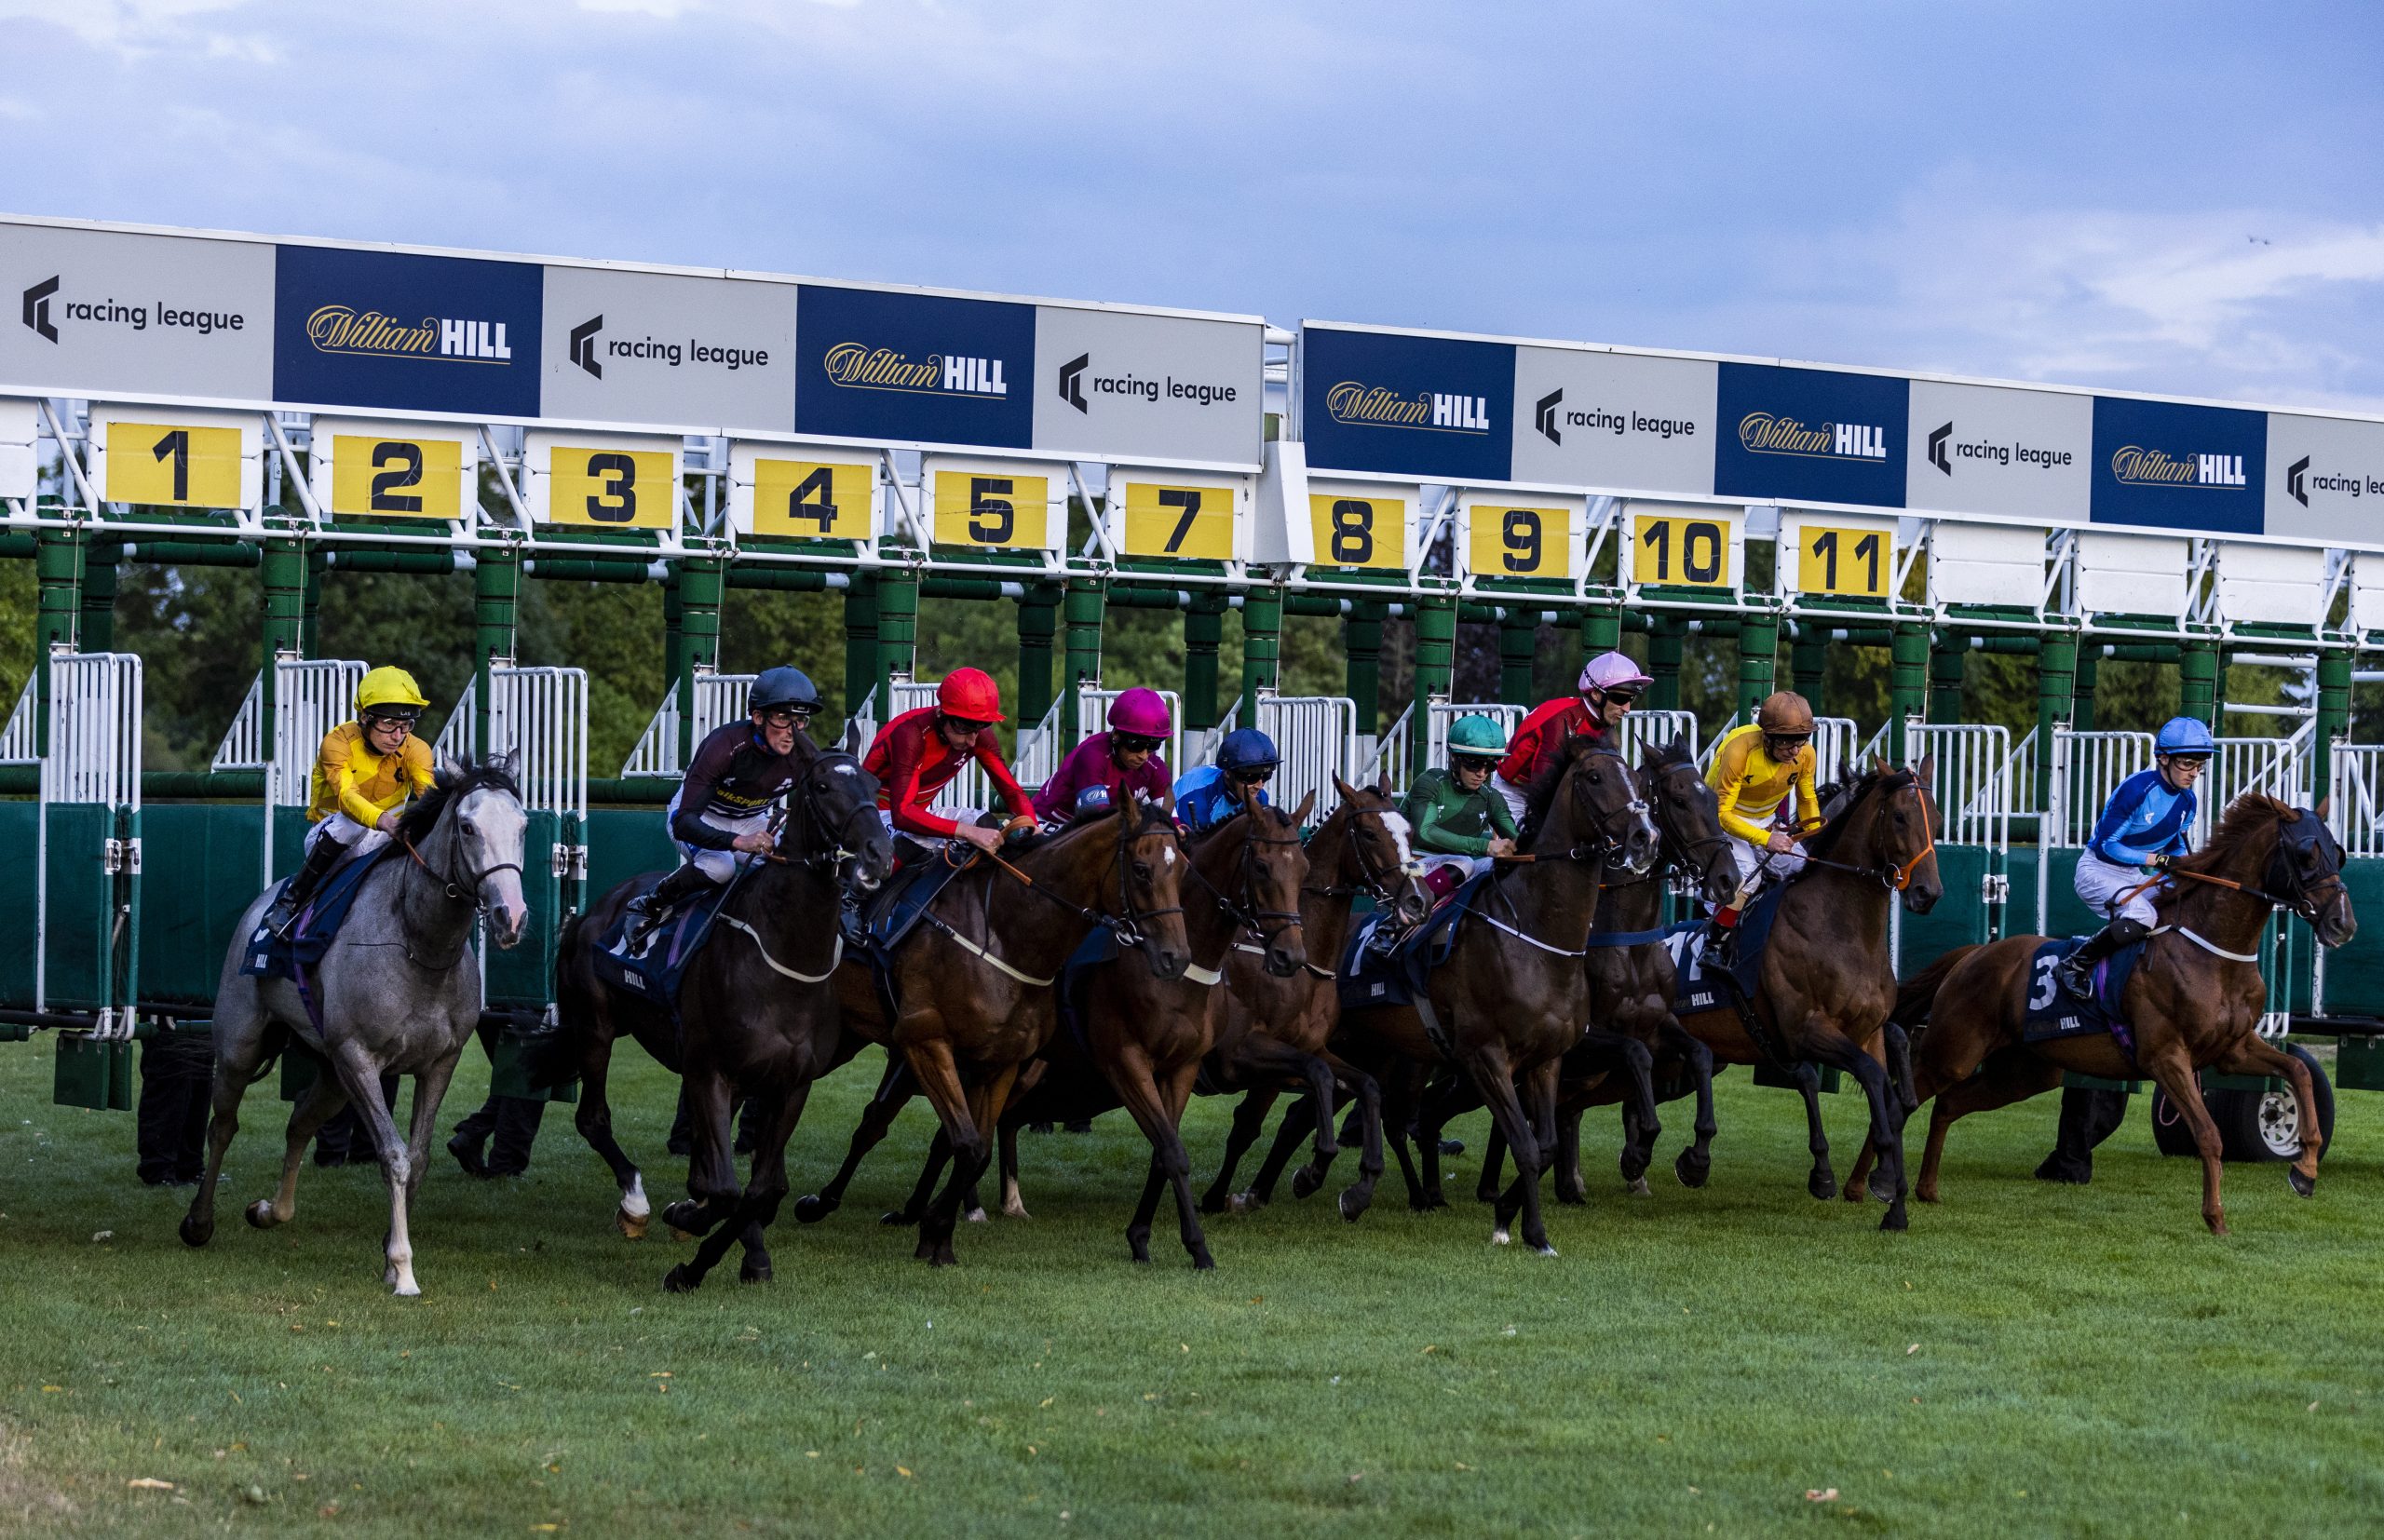 william hill live racing